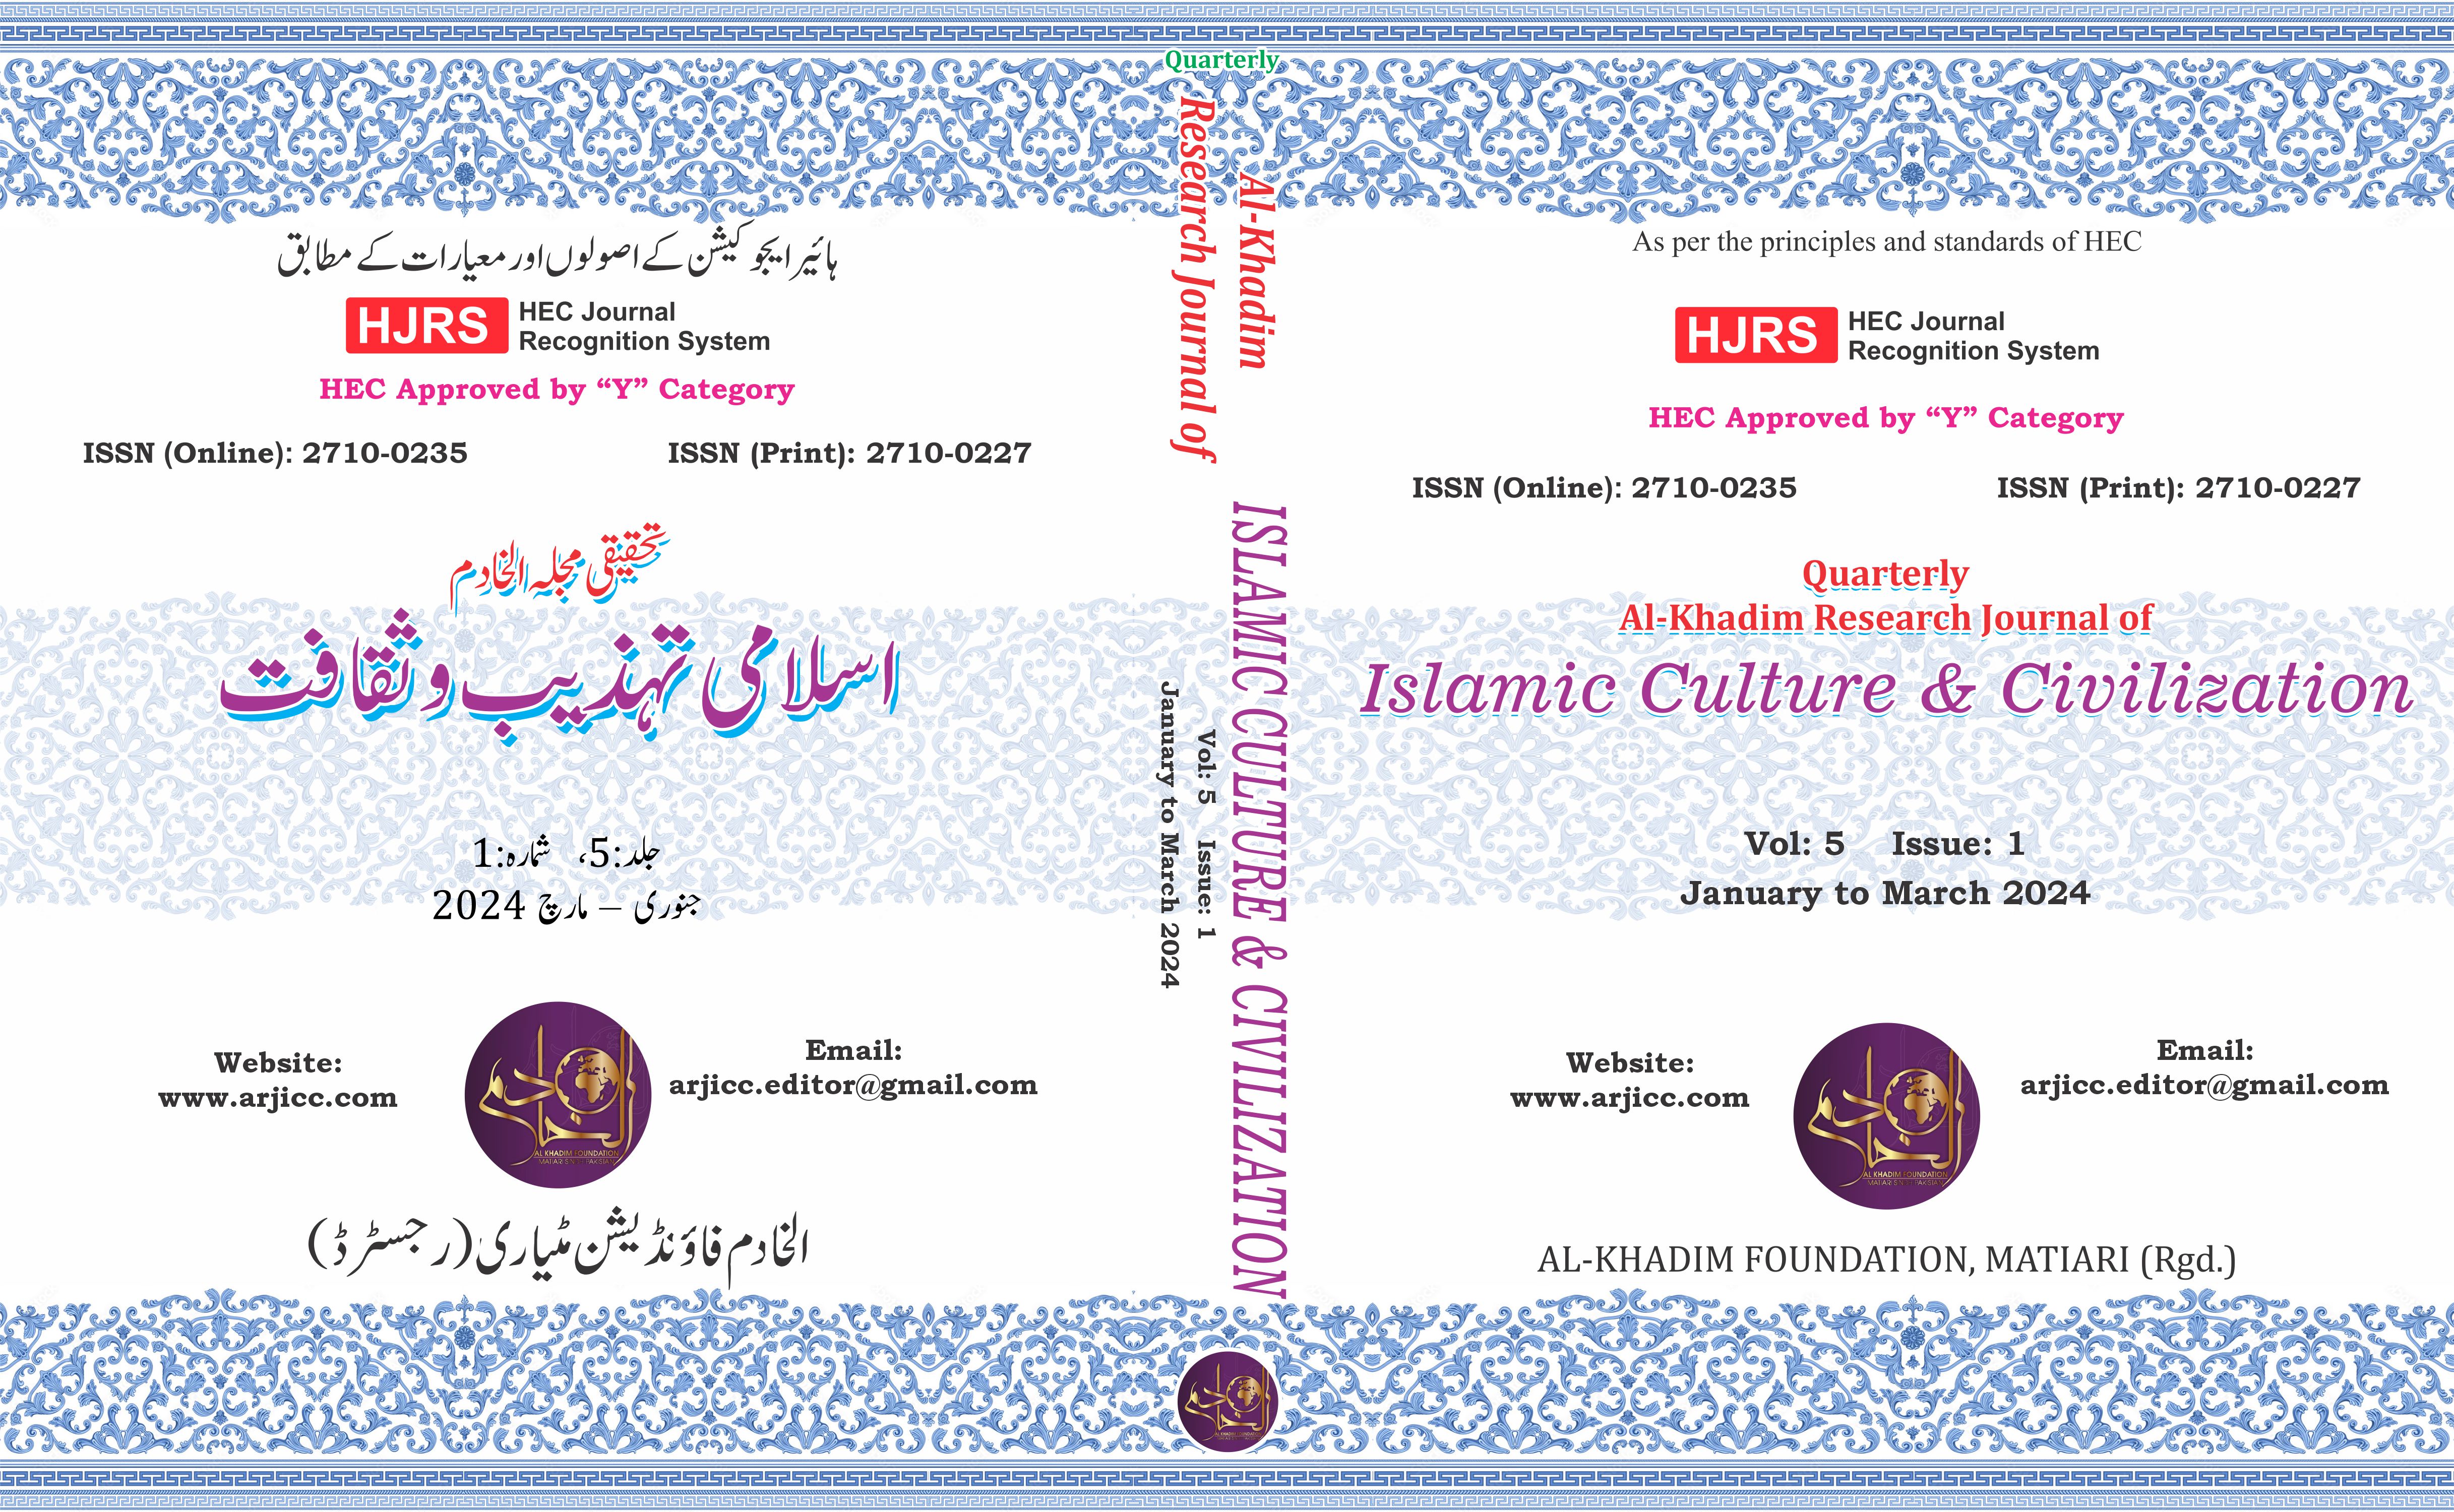 					View Vol. 5 No. 1 (2024): Al Khadim Research Journal of Islamic Culture and Civilization (January to March 2024)
				